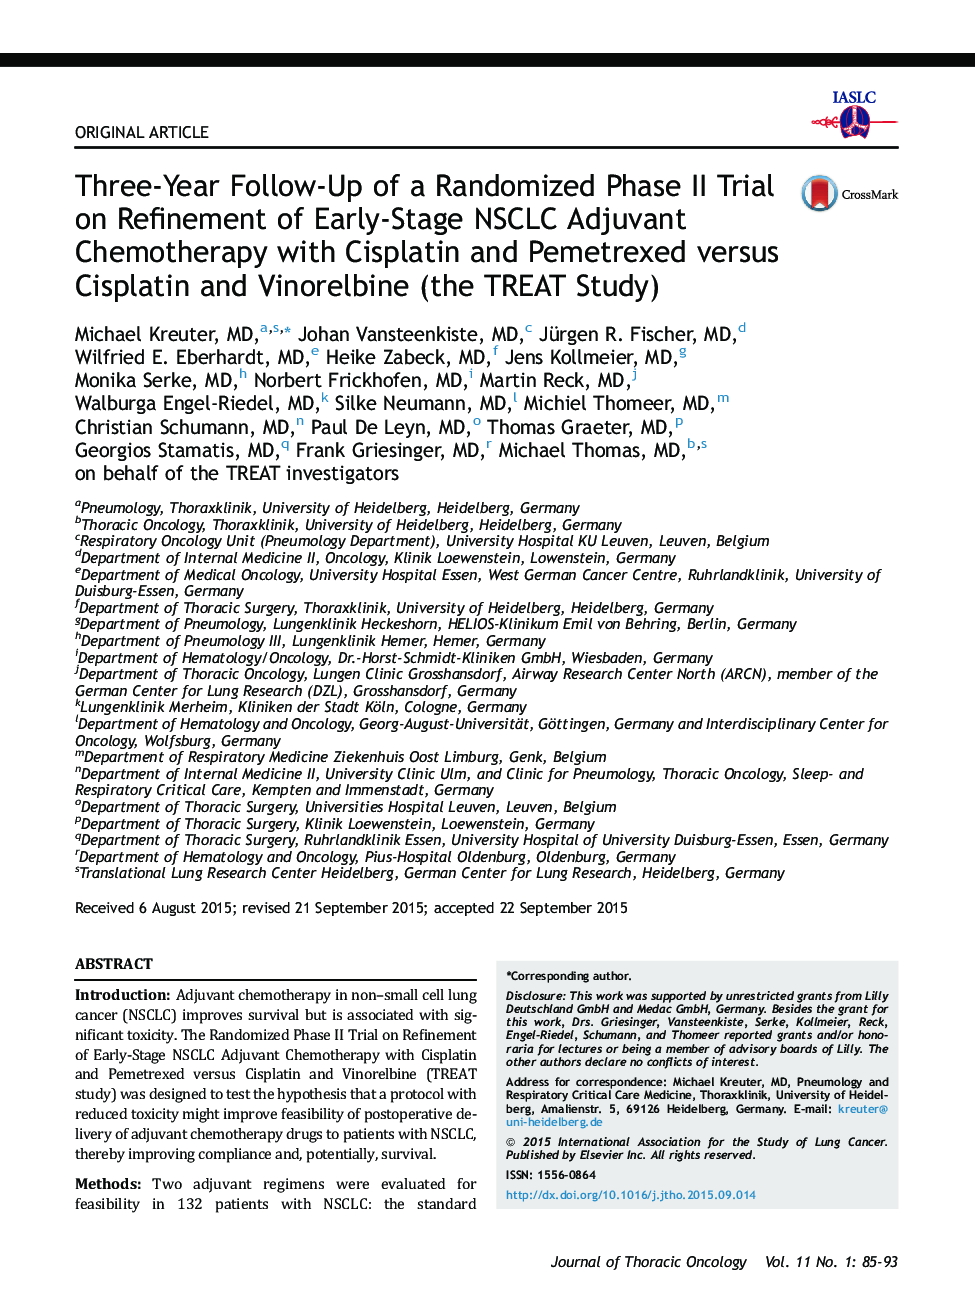 Three-Year Follow-Up of a Randomized Phase II Trial on Refinement of Early-Stage NSCLC Adjuvant Chemotherapy with Cisplatin and Pemetrexed versus Cisplatin and Vinorelbine (the TREAT Study) 